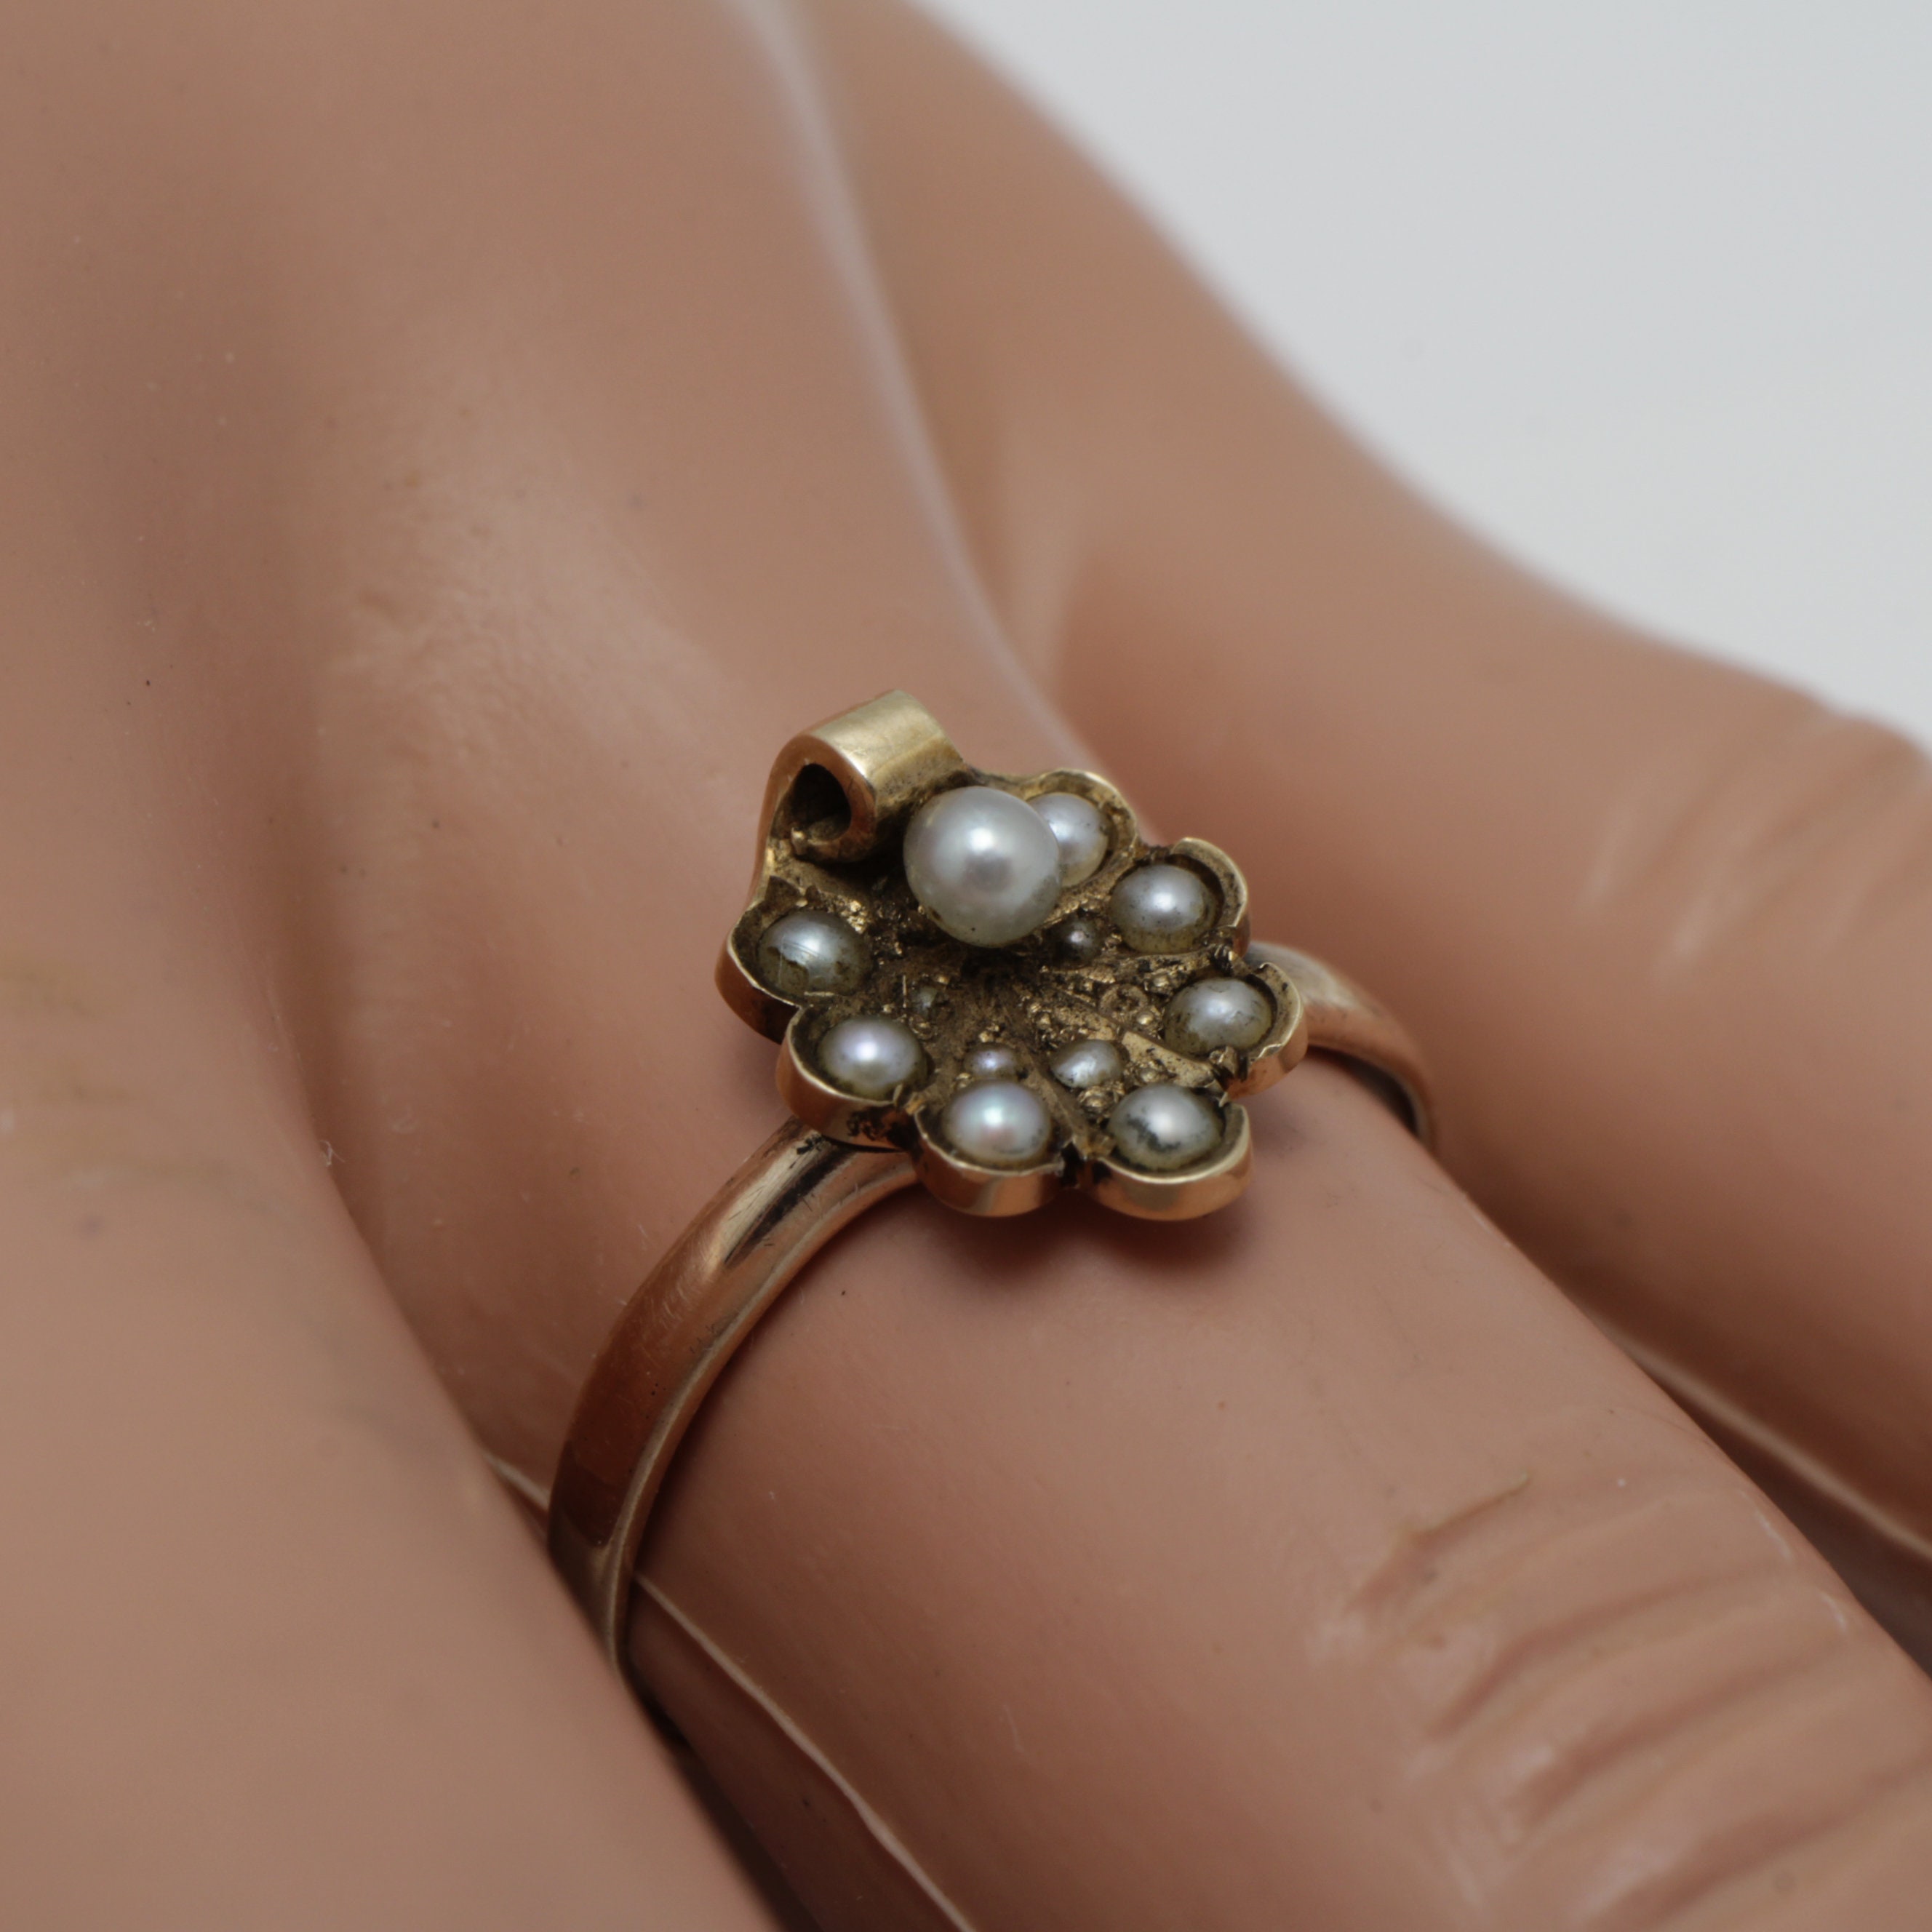 Buy Antique Victorian Diamond Seed Pearl Ring Engagement Ring 14K Gold Size  8 Online in India - Etsy